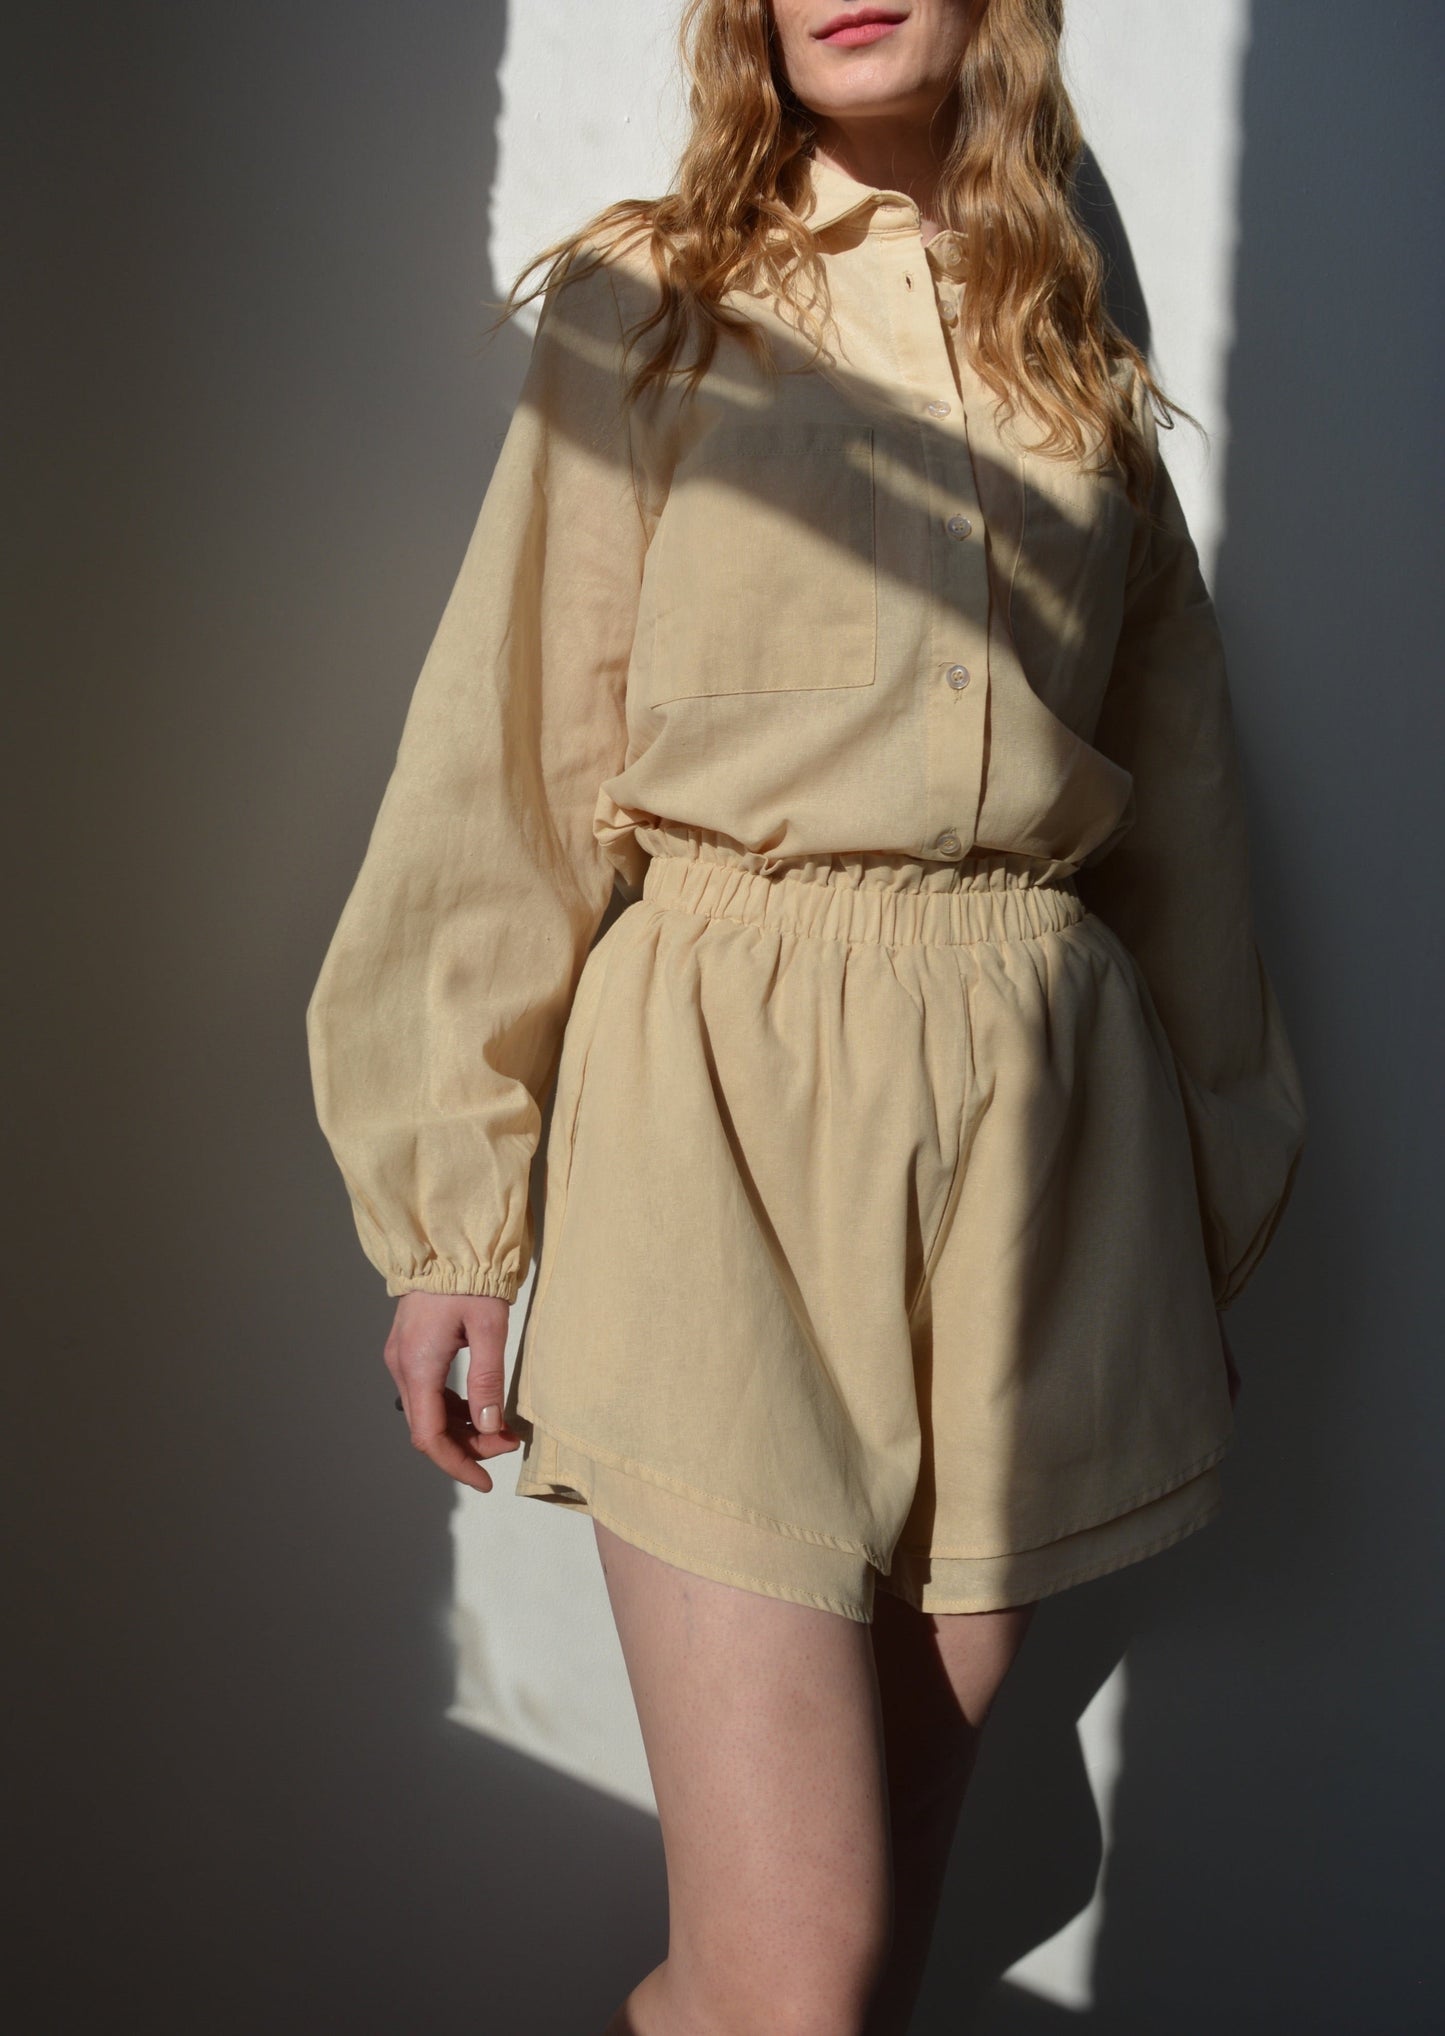 Two Piece Set - Cotton Blouse and Shorts in Beige color